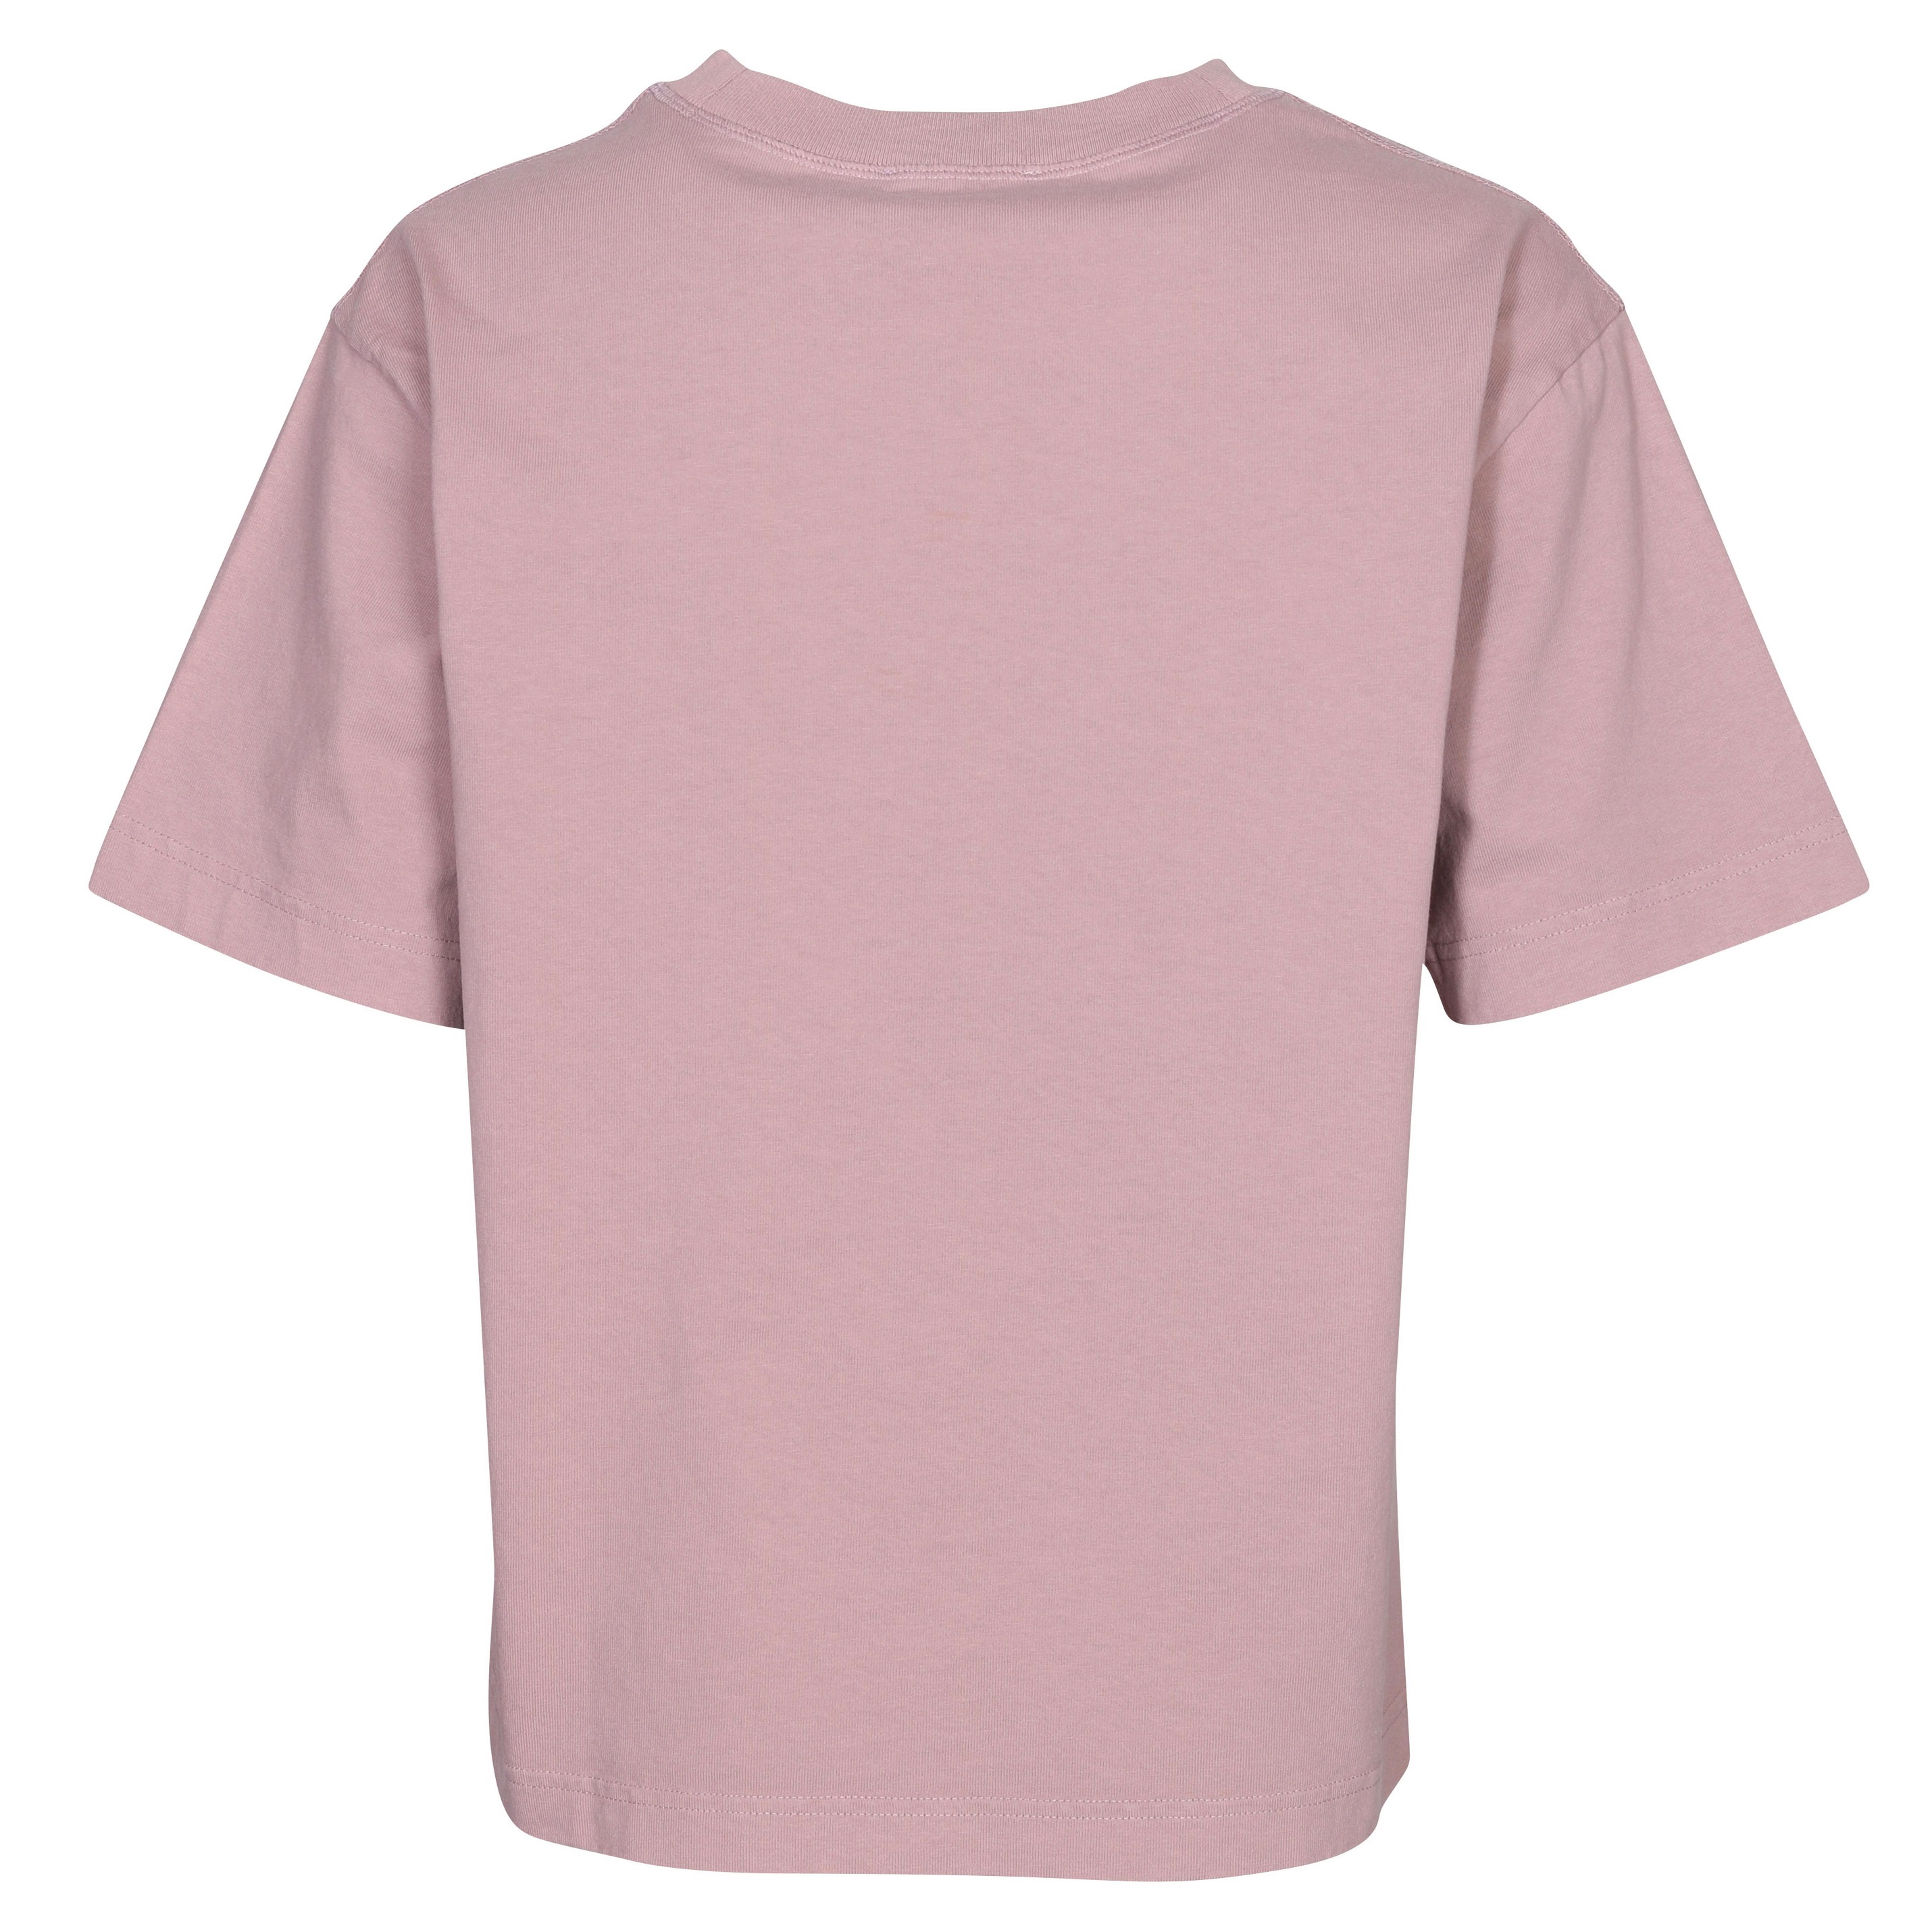 Acne Studios Stamp T-Shirt in Mauve Pink S